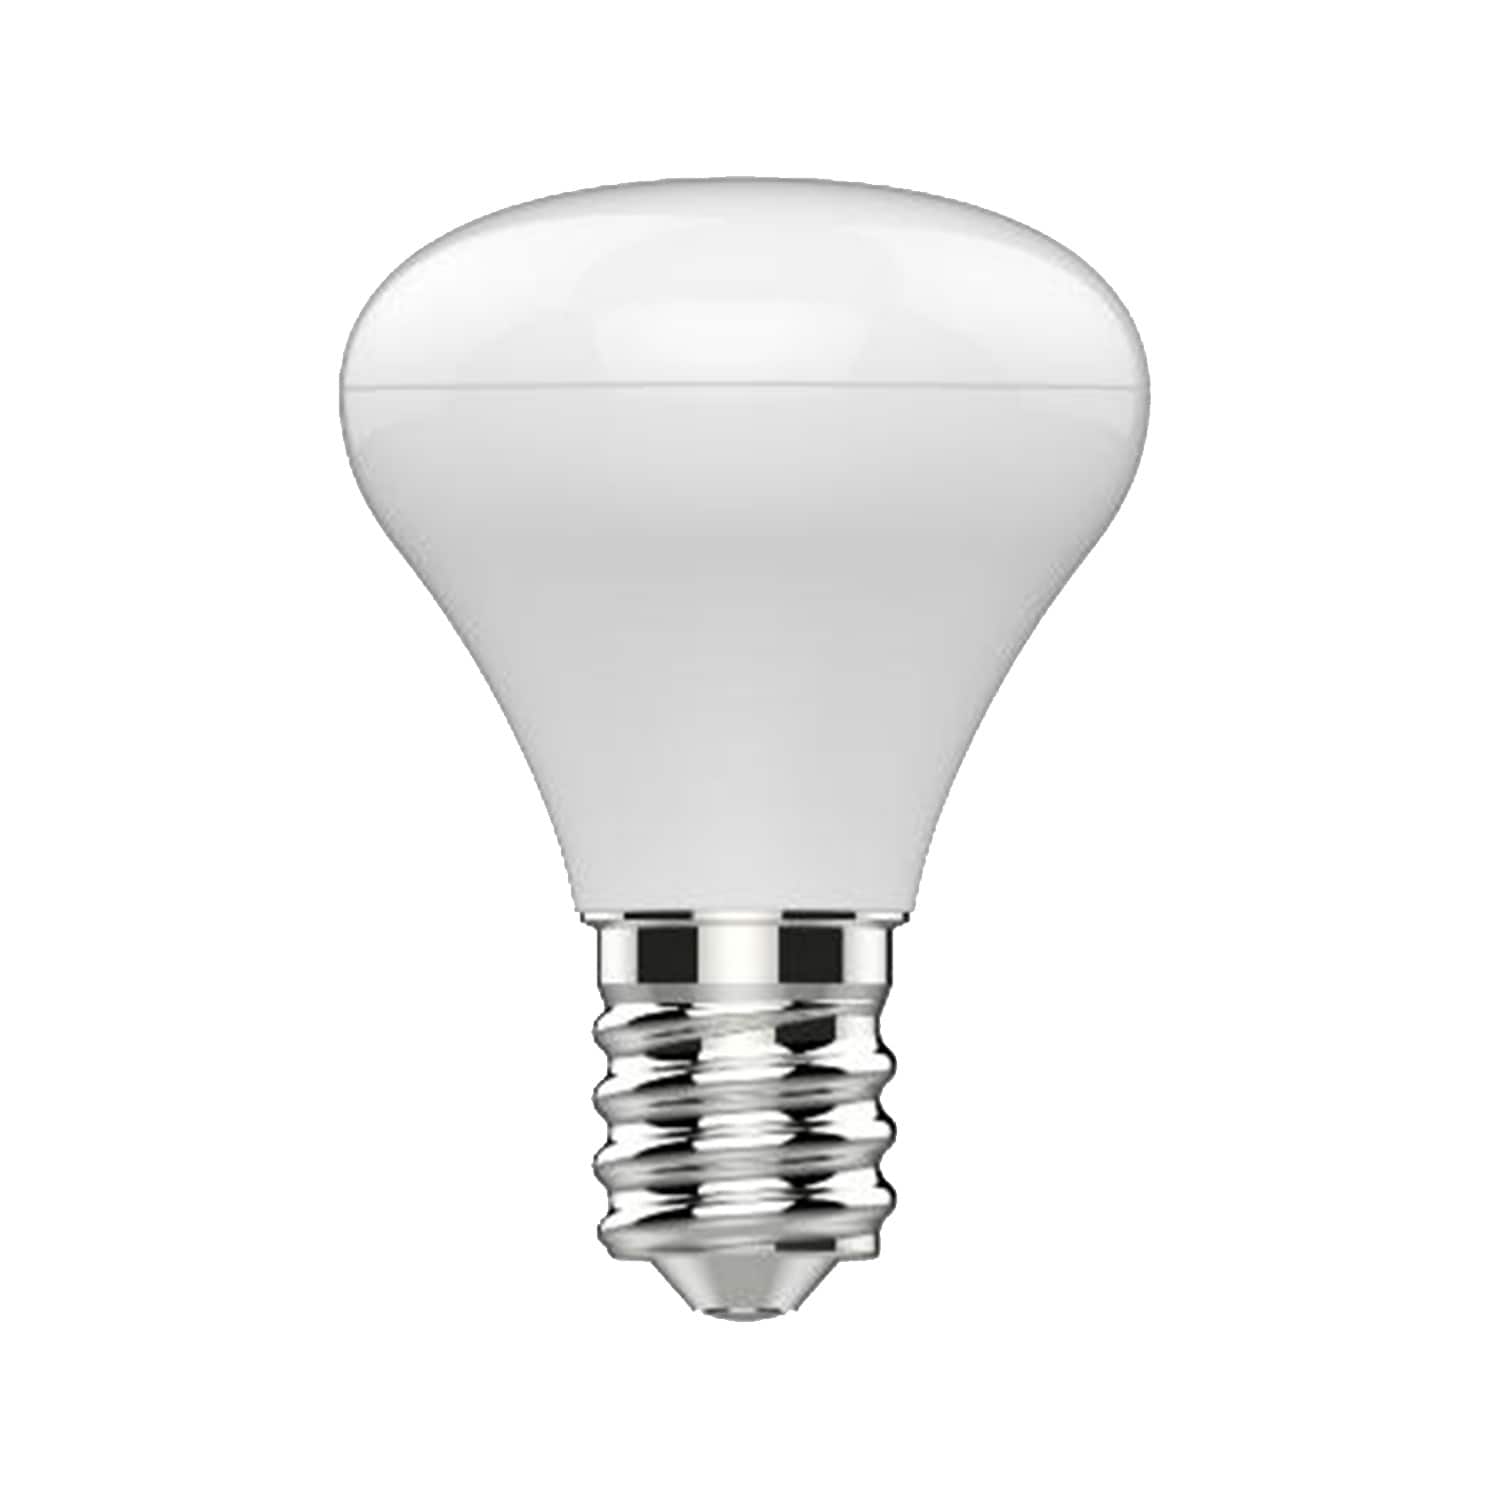 Value Classic LED Ball E14 Dimmable 4W 4000K Natural White, 470lm, Clear  Finish, 3yrs Warranty (3LT516E) - Posh Living